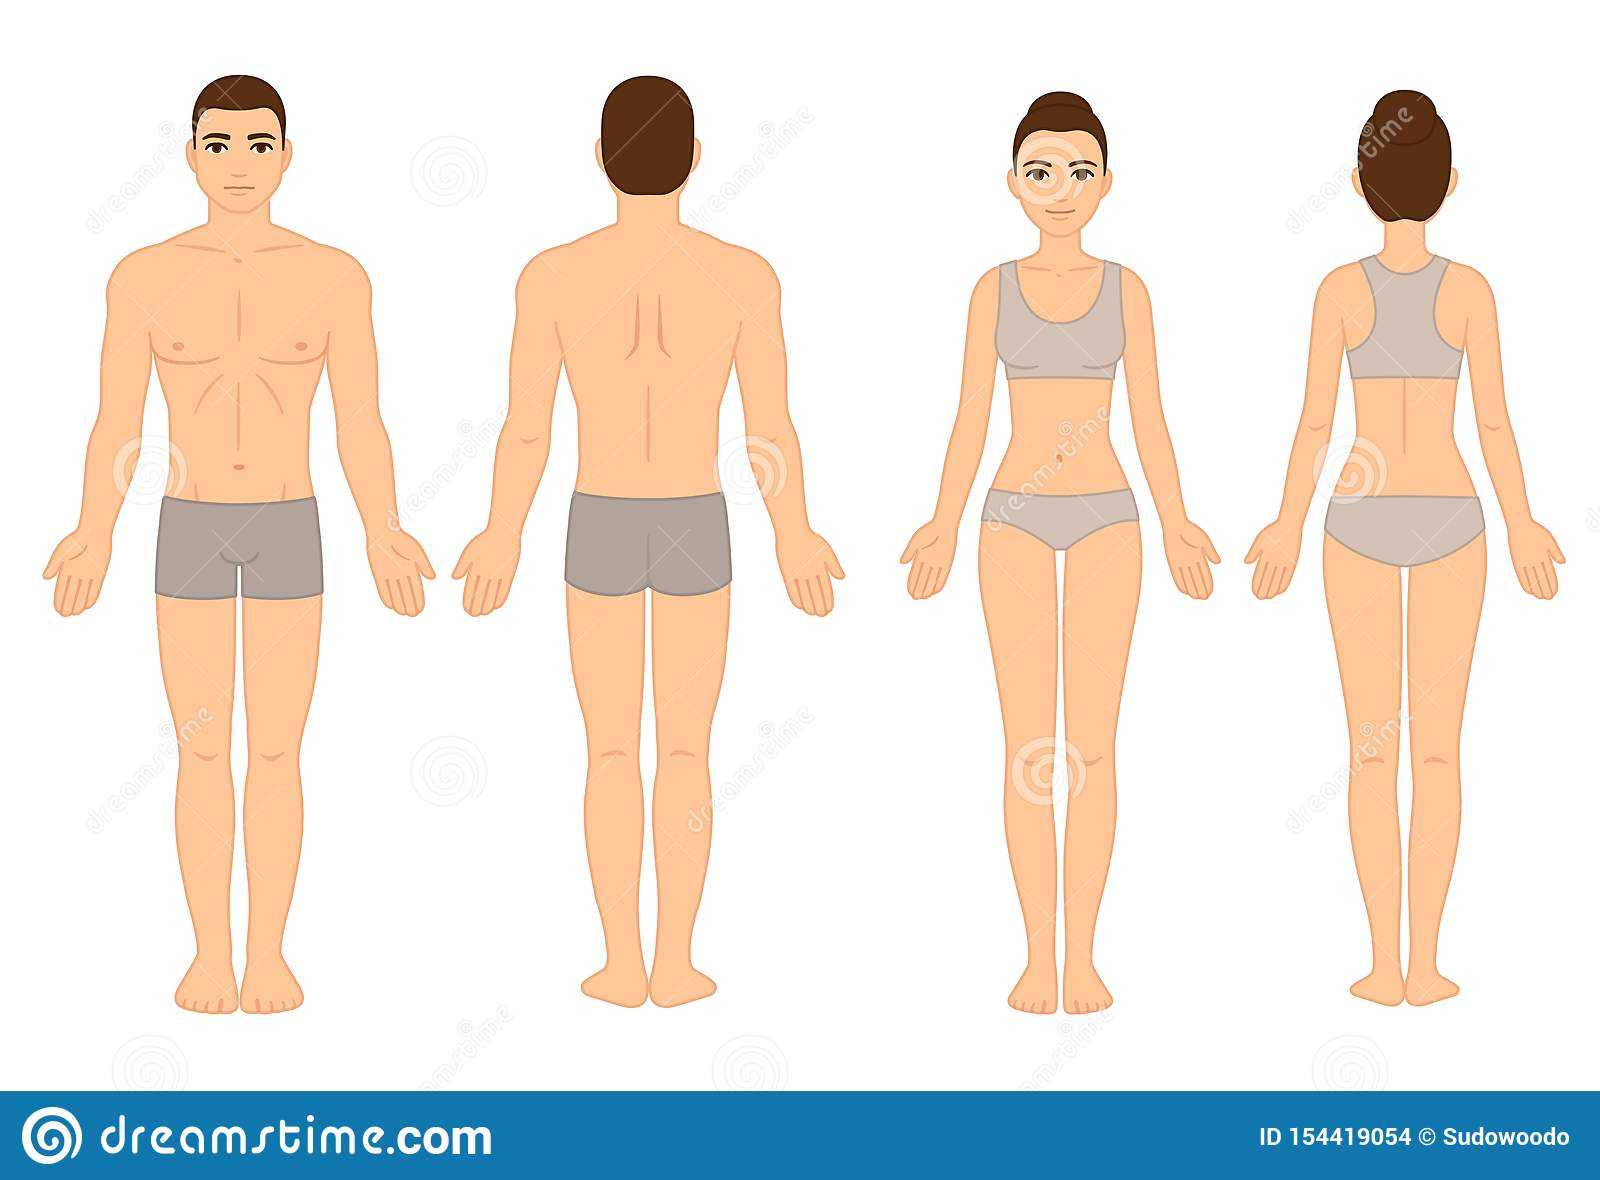 Male And Female Body Chart Stock Vector. Illustration Of With Blank Body Map Template